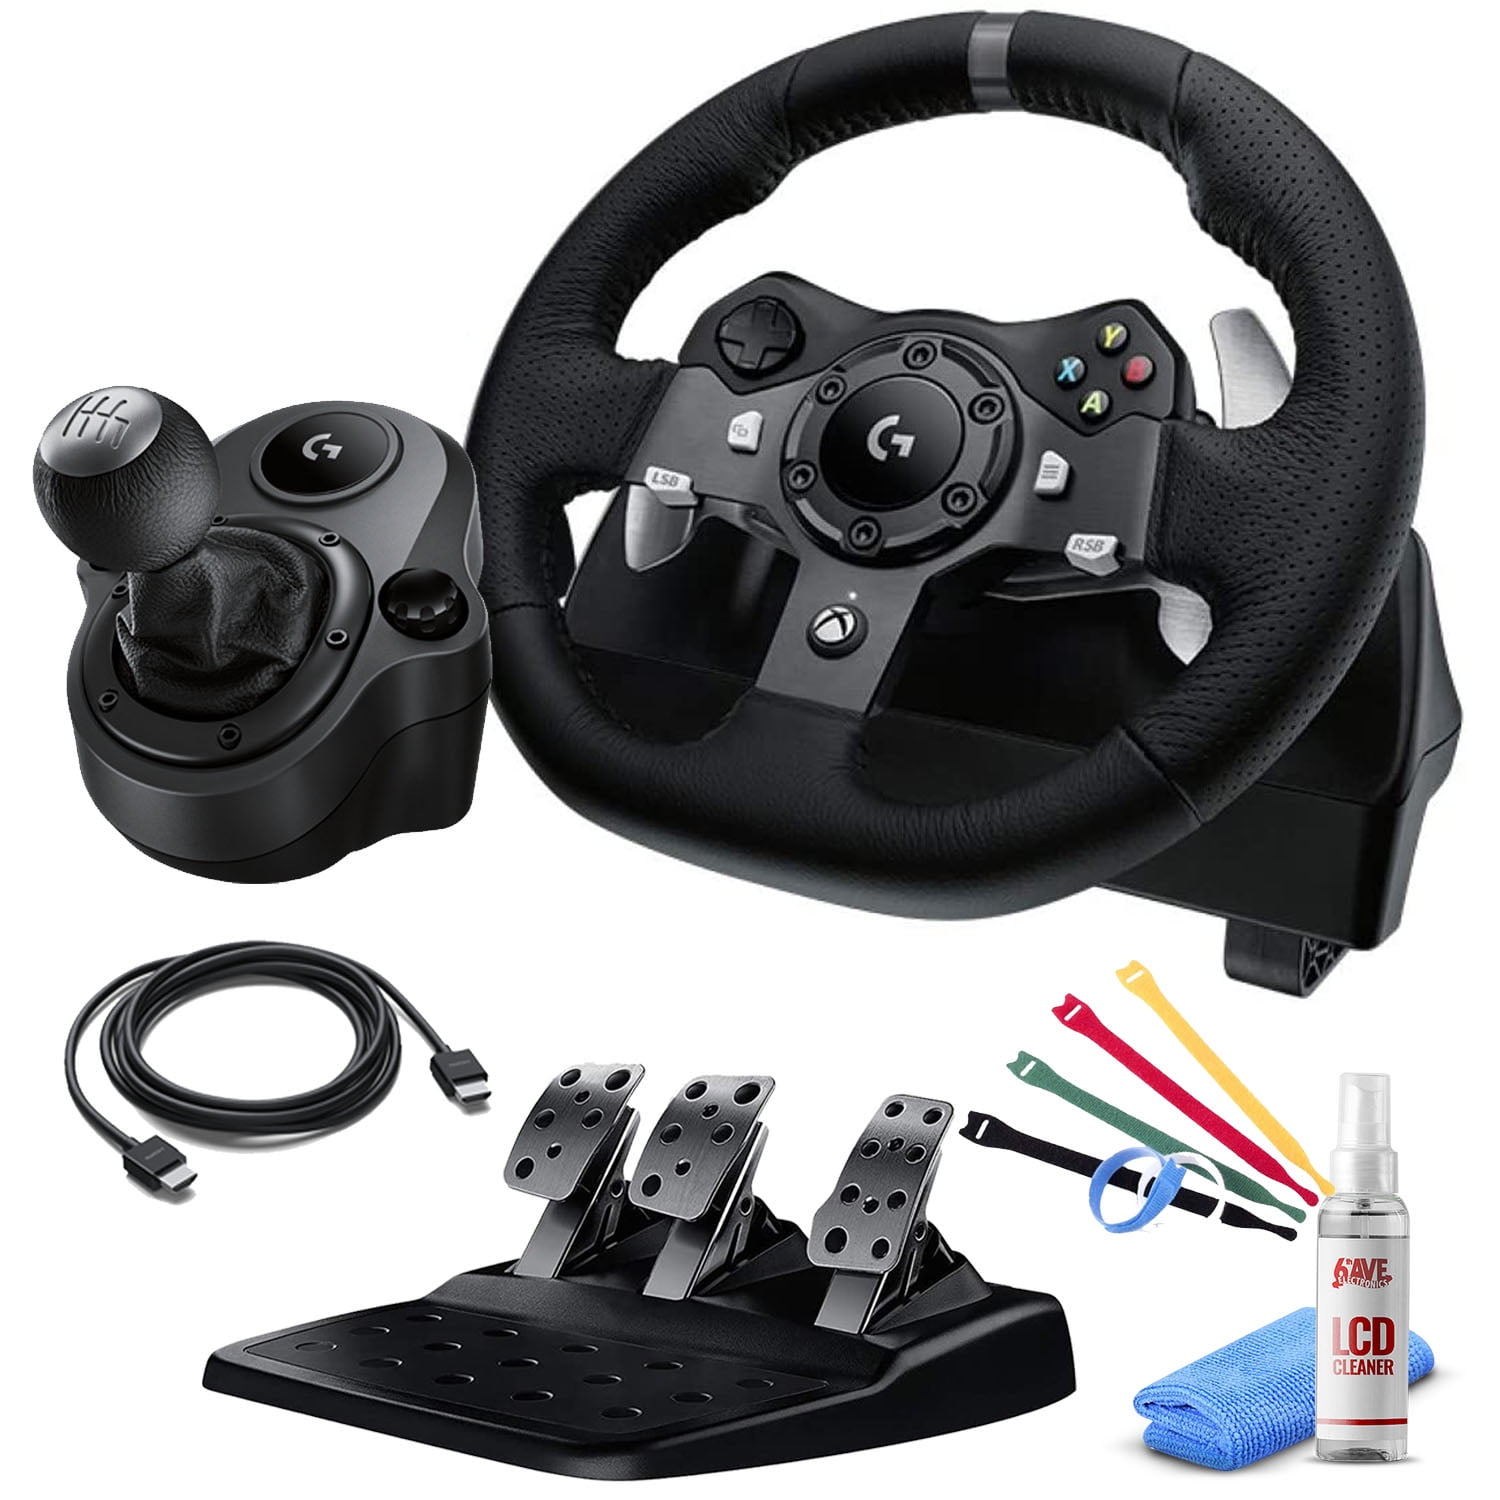 Logitech - G920 Driving Force Racing Wheel and pedals for Xbox Series X, S,  Xbox One, PC - Black